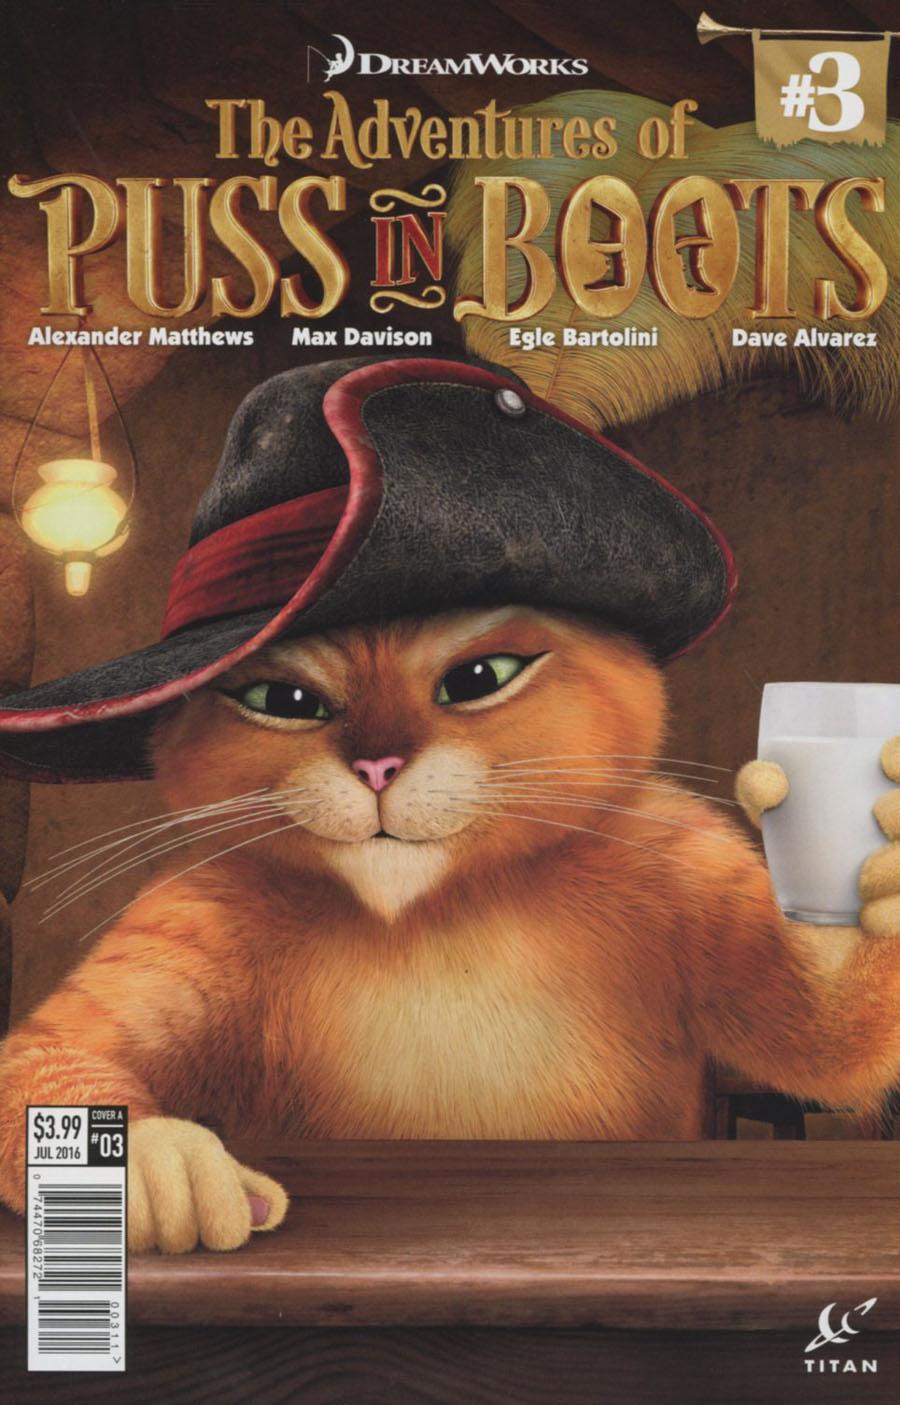 Puss In Boots Vol. 1 #3